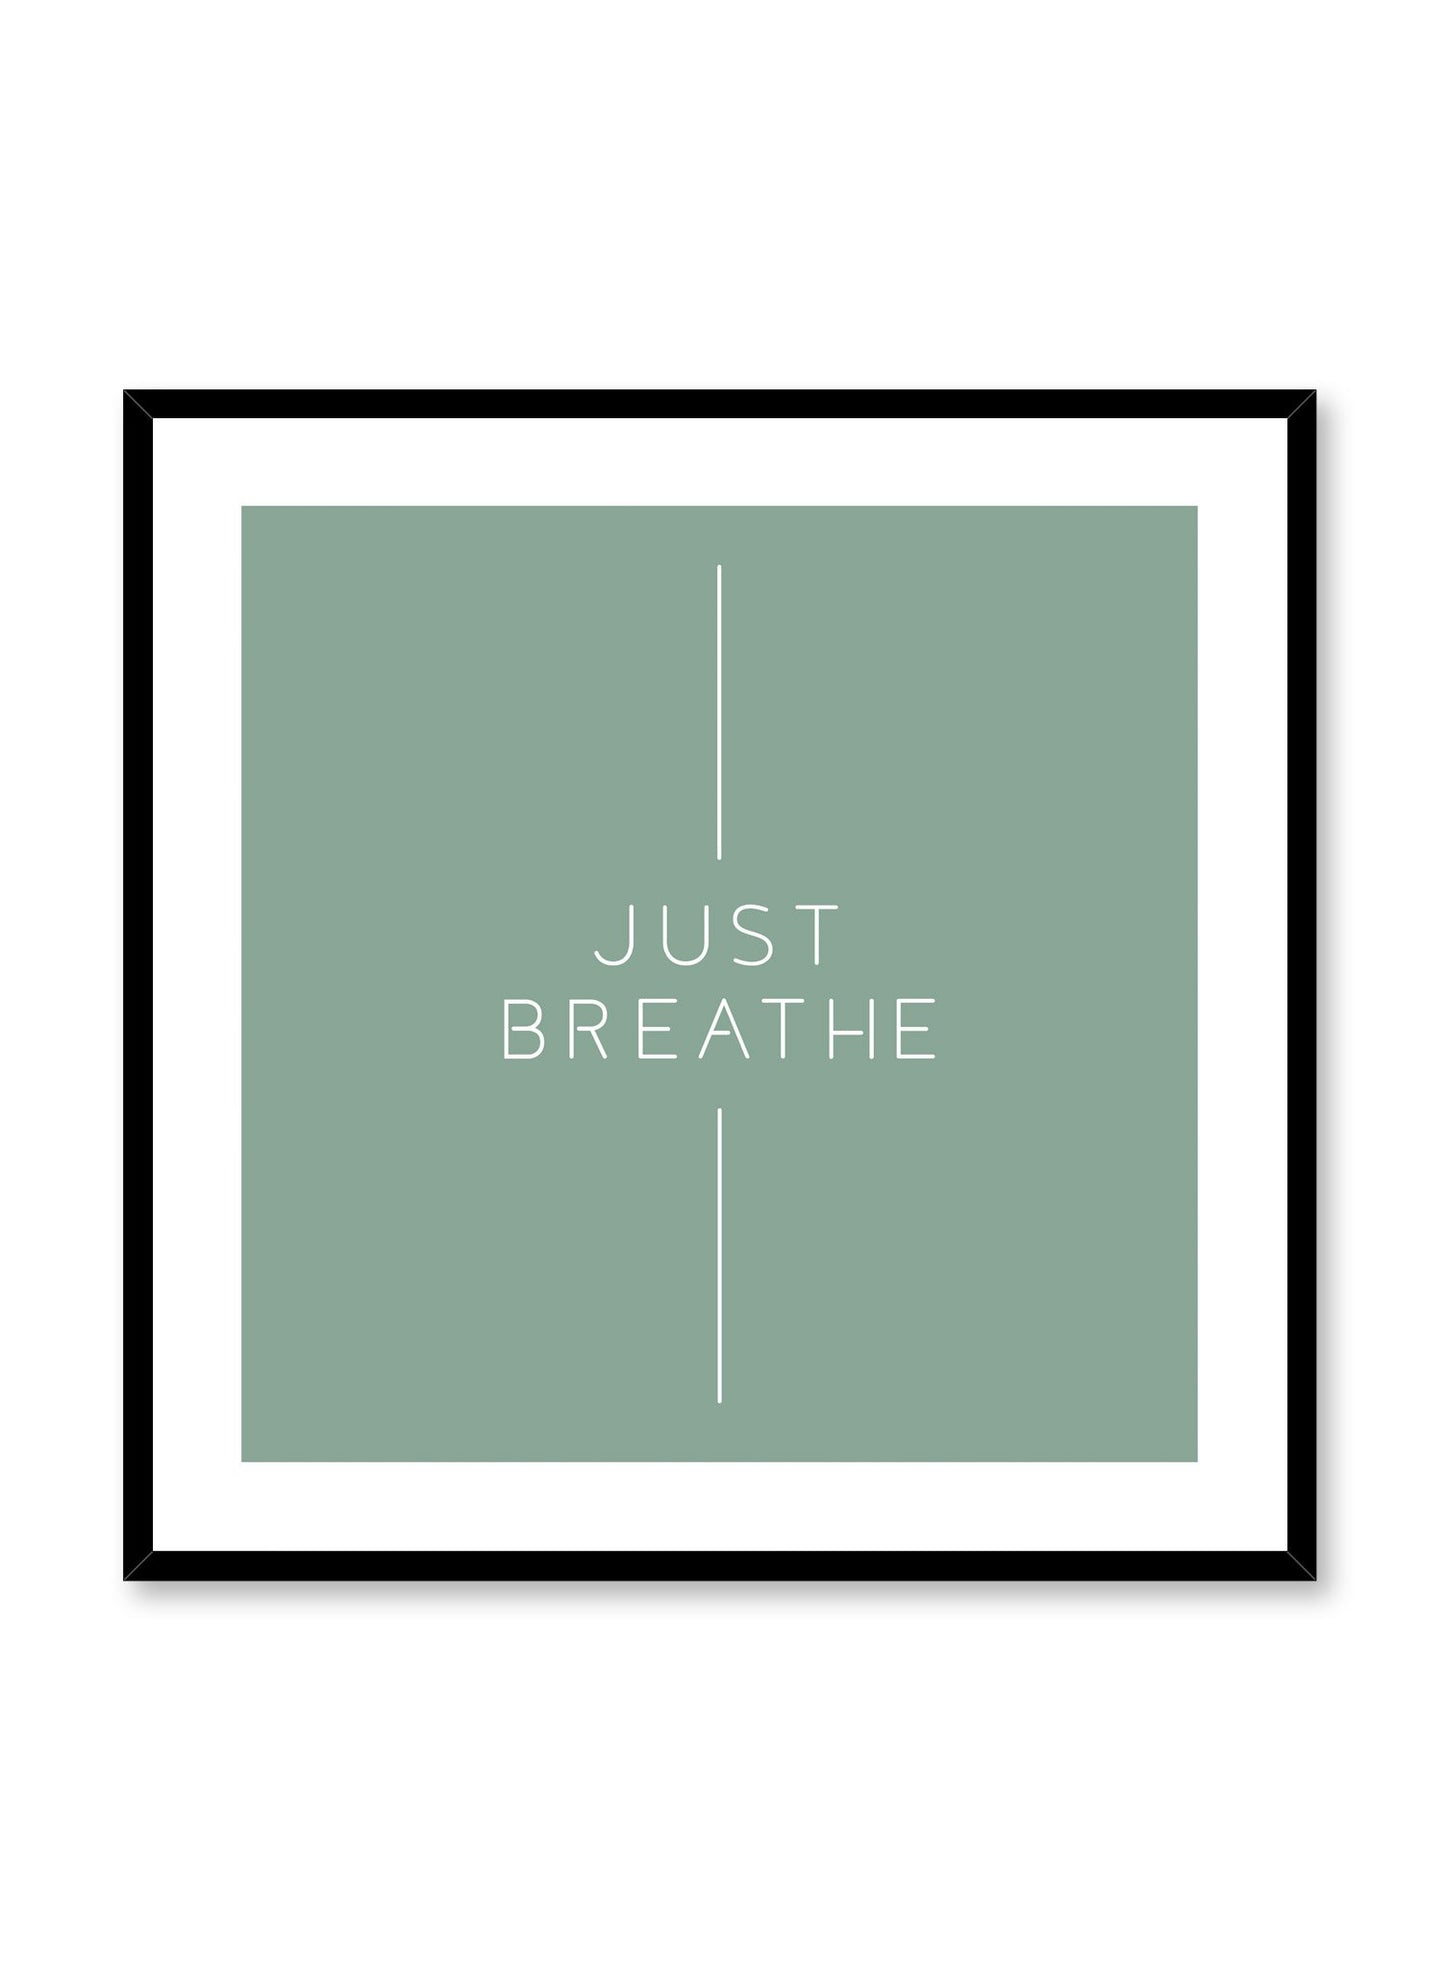 Modern minimalist typography poster by Opposite Wall with Just Breathe quote in green